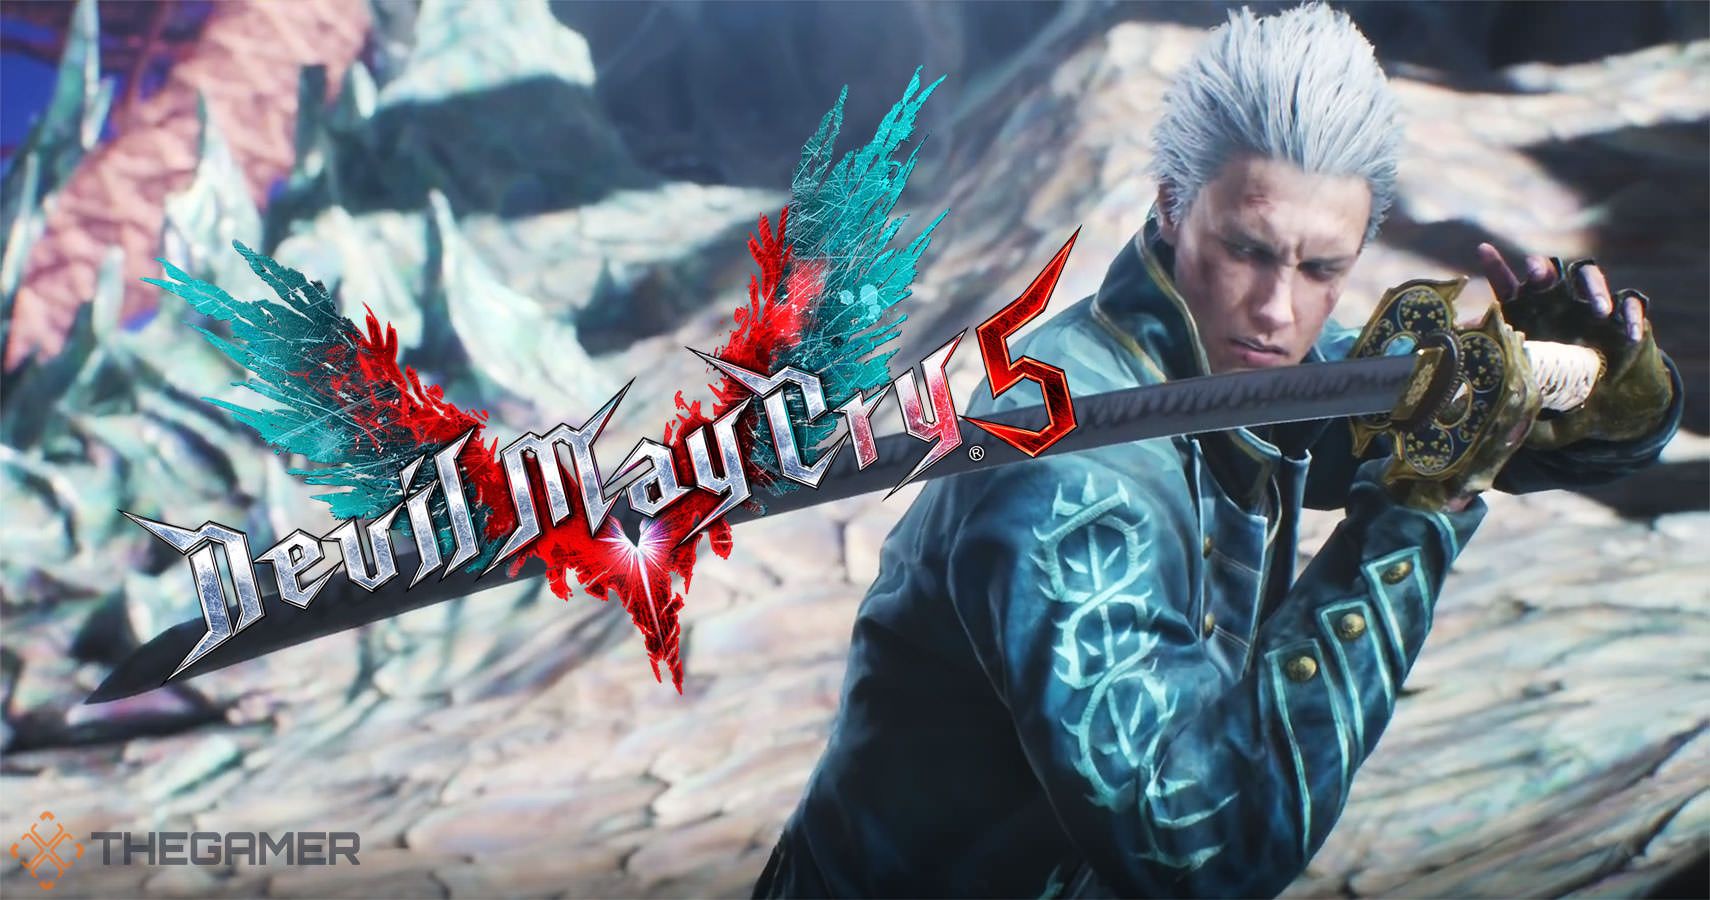 Vergil helps take the swordplay even further in the special edition